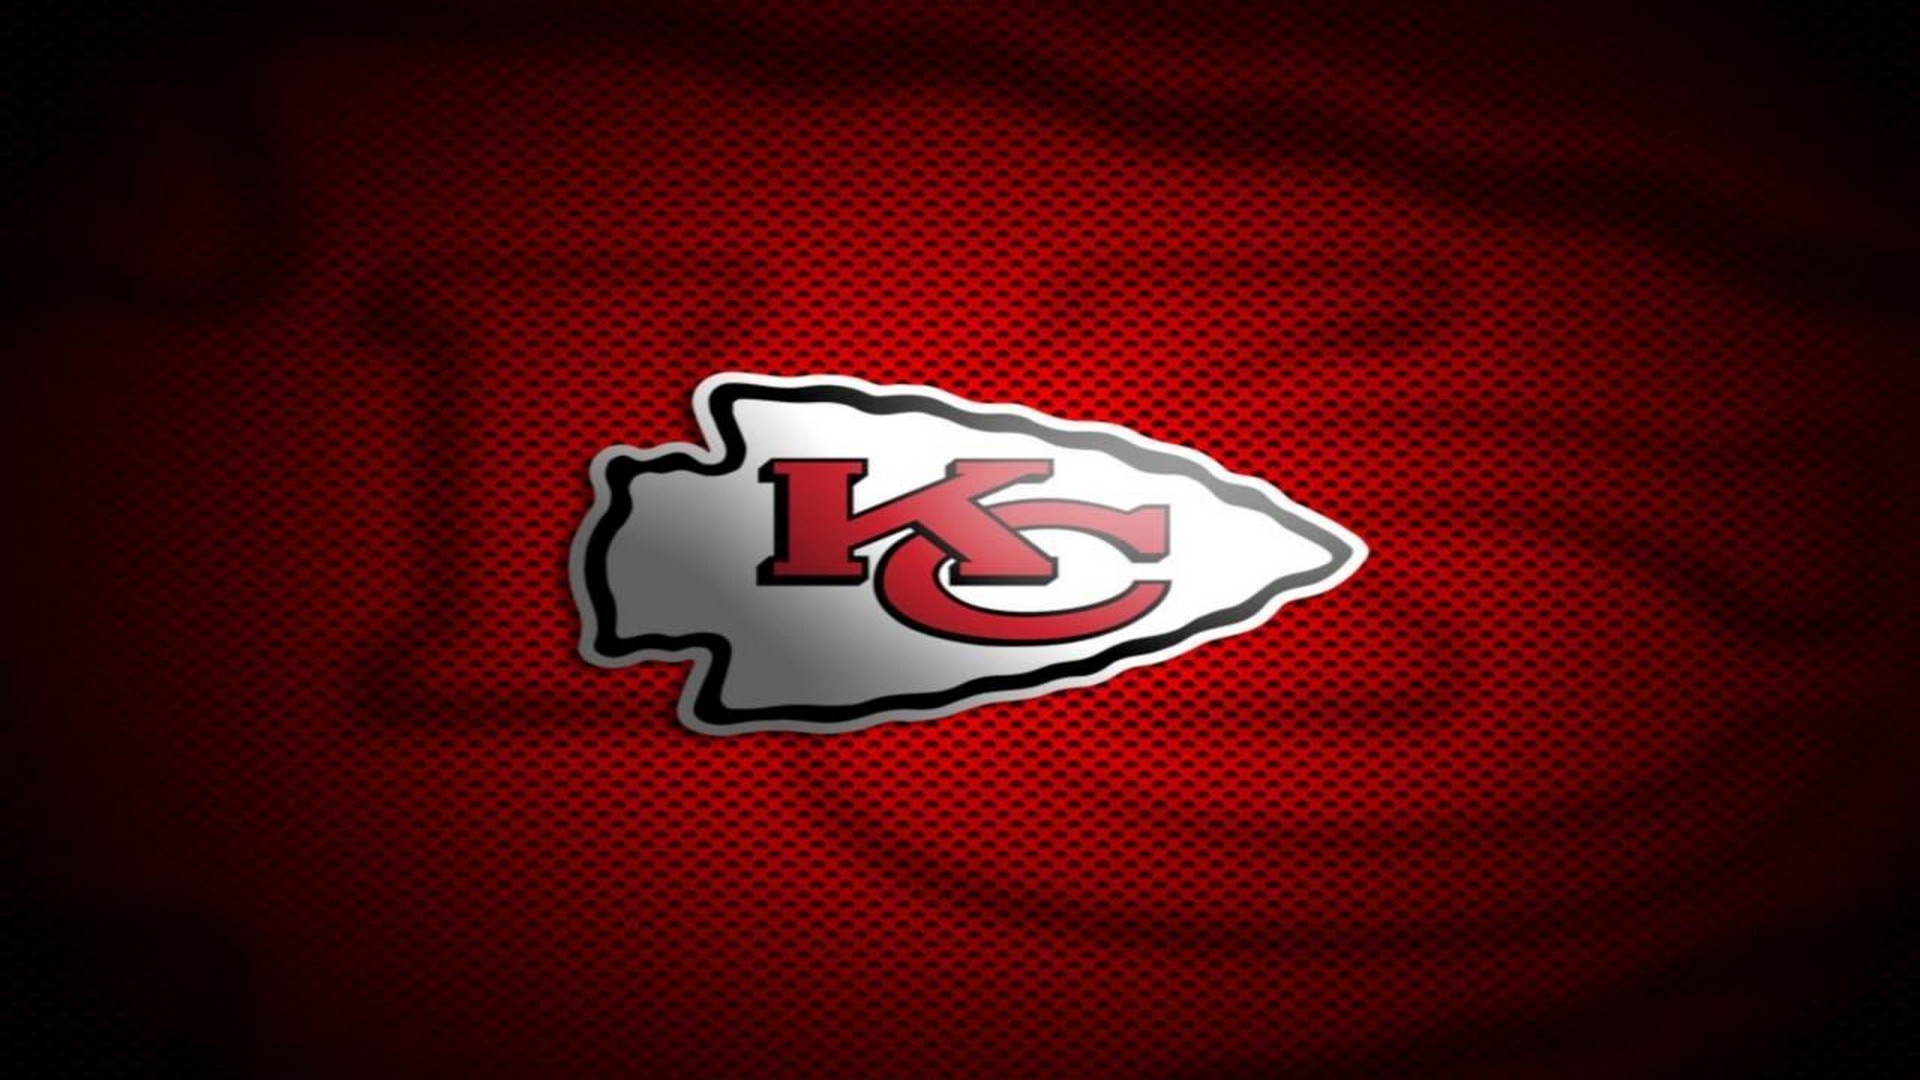 HD Kansas City Chiefs Backgrounds with resolution 1920x1080 pixel. You can make this wallpaper for your Mac or Windows Desktop Background, iPhone, Android or Tablet and another Smartphone device